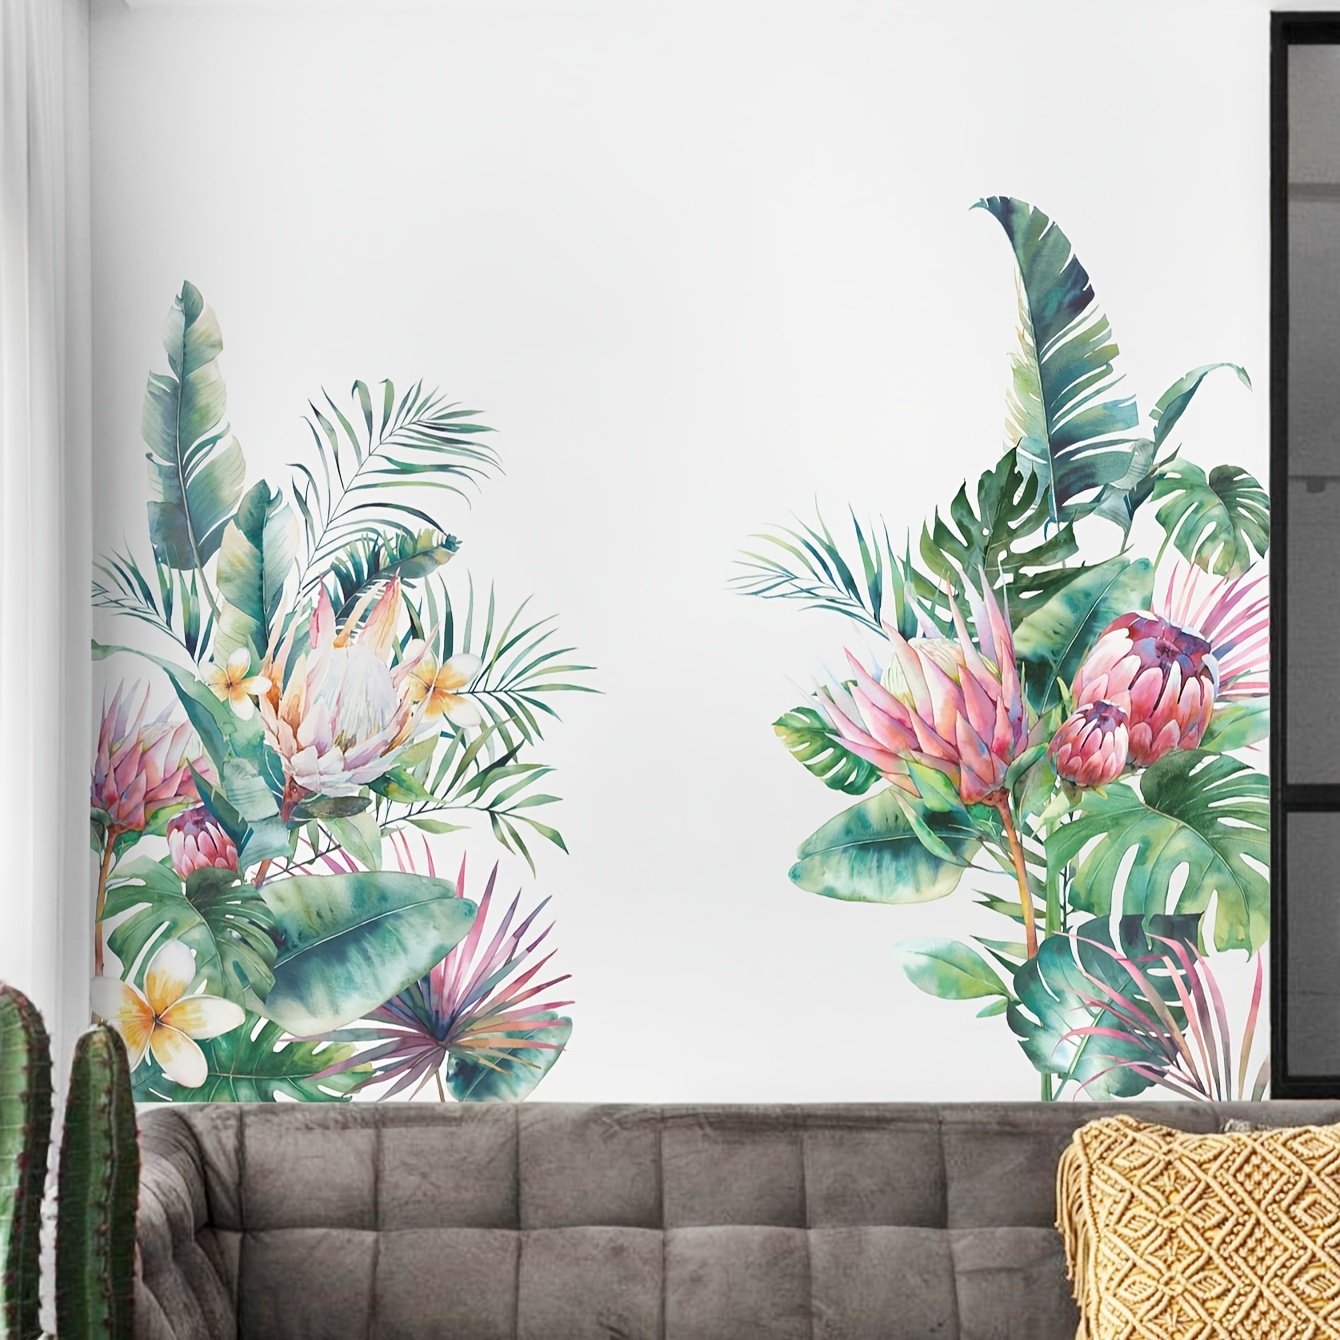 Plant Wall Stickers, Tropical Vegetation, Removable Waterproof ...